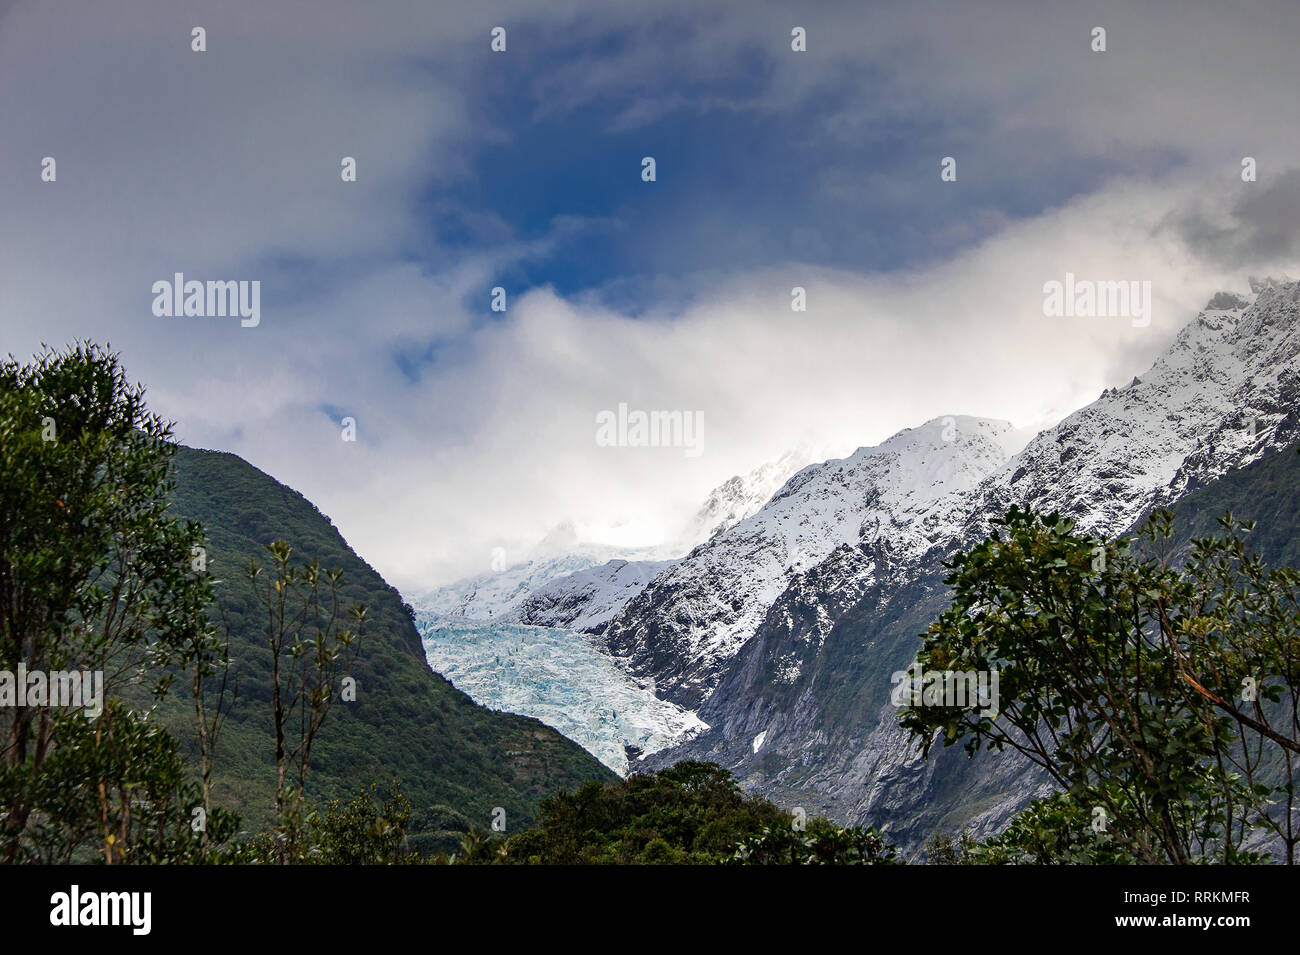 Franz Josef Glacier, New Zealand. Retreating glacier with snowy mountain sides, rocky slopes and dark green forest foreground Stock Photo